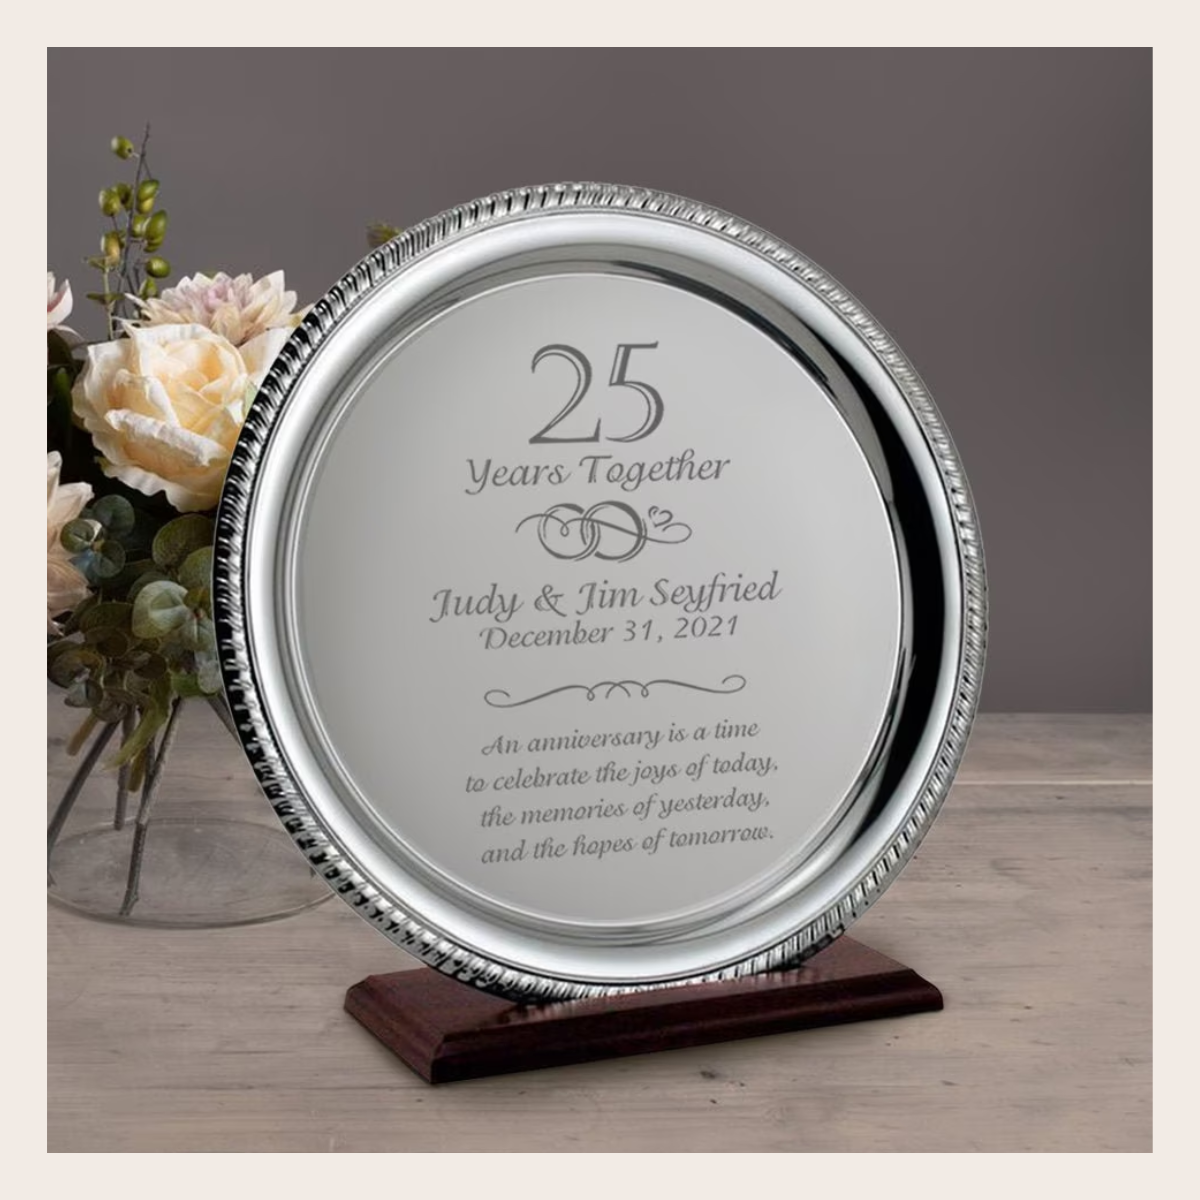 25 Awesome Anniversary Gift Ideas for Under $25 | Happy Wives Club